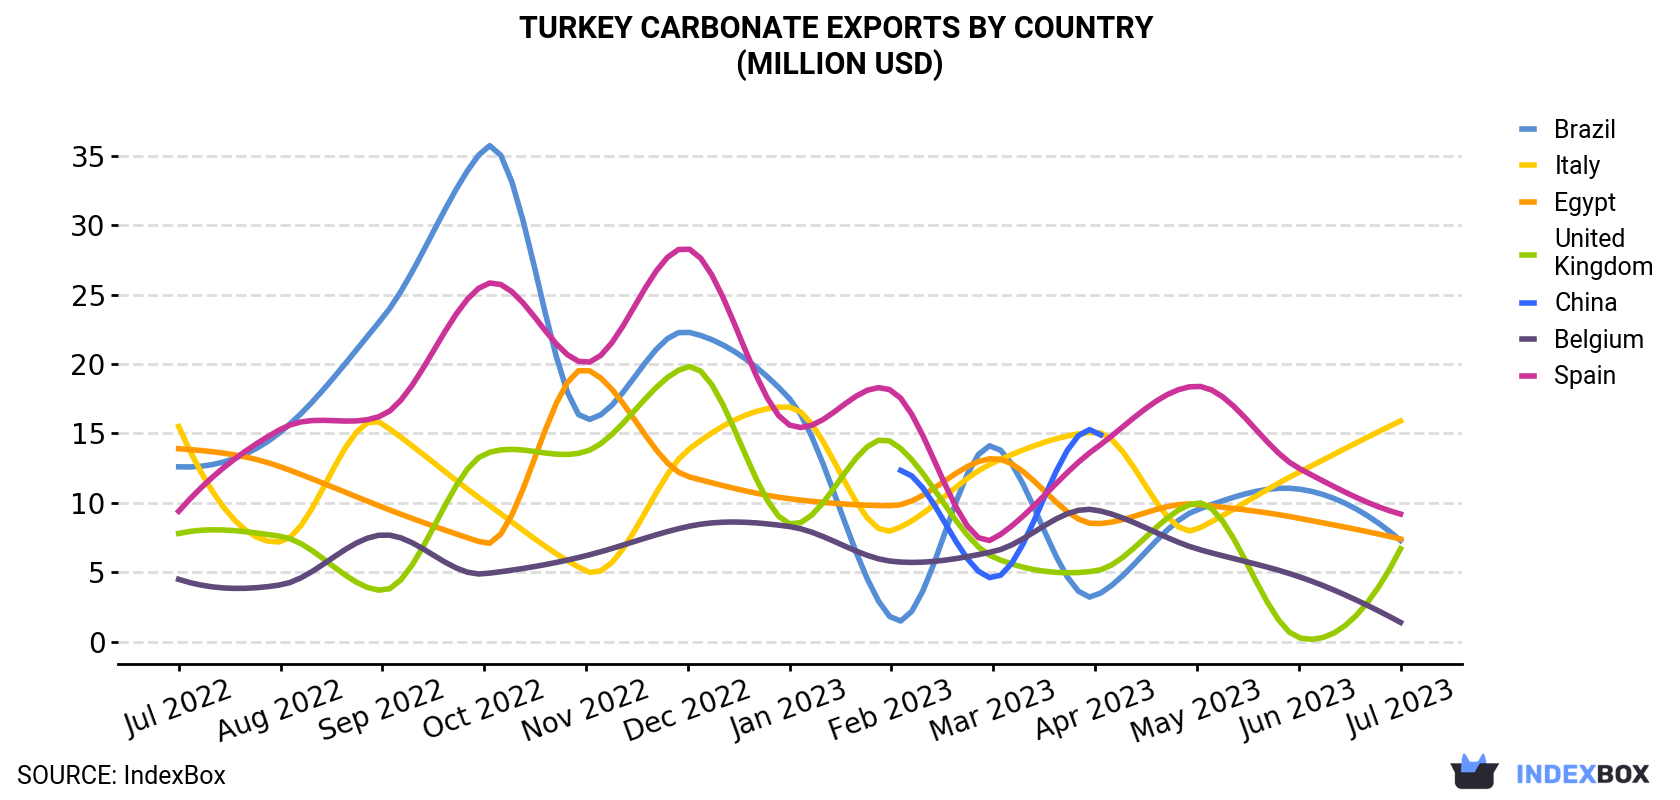 Turkey Carbonate Exports By Country (Million USD)